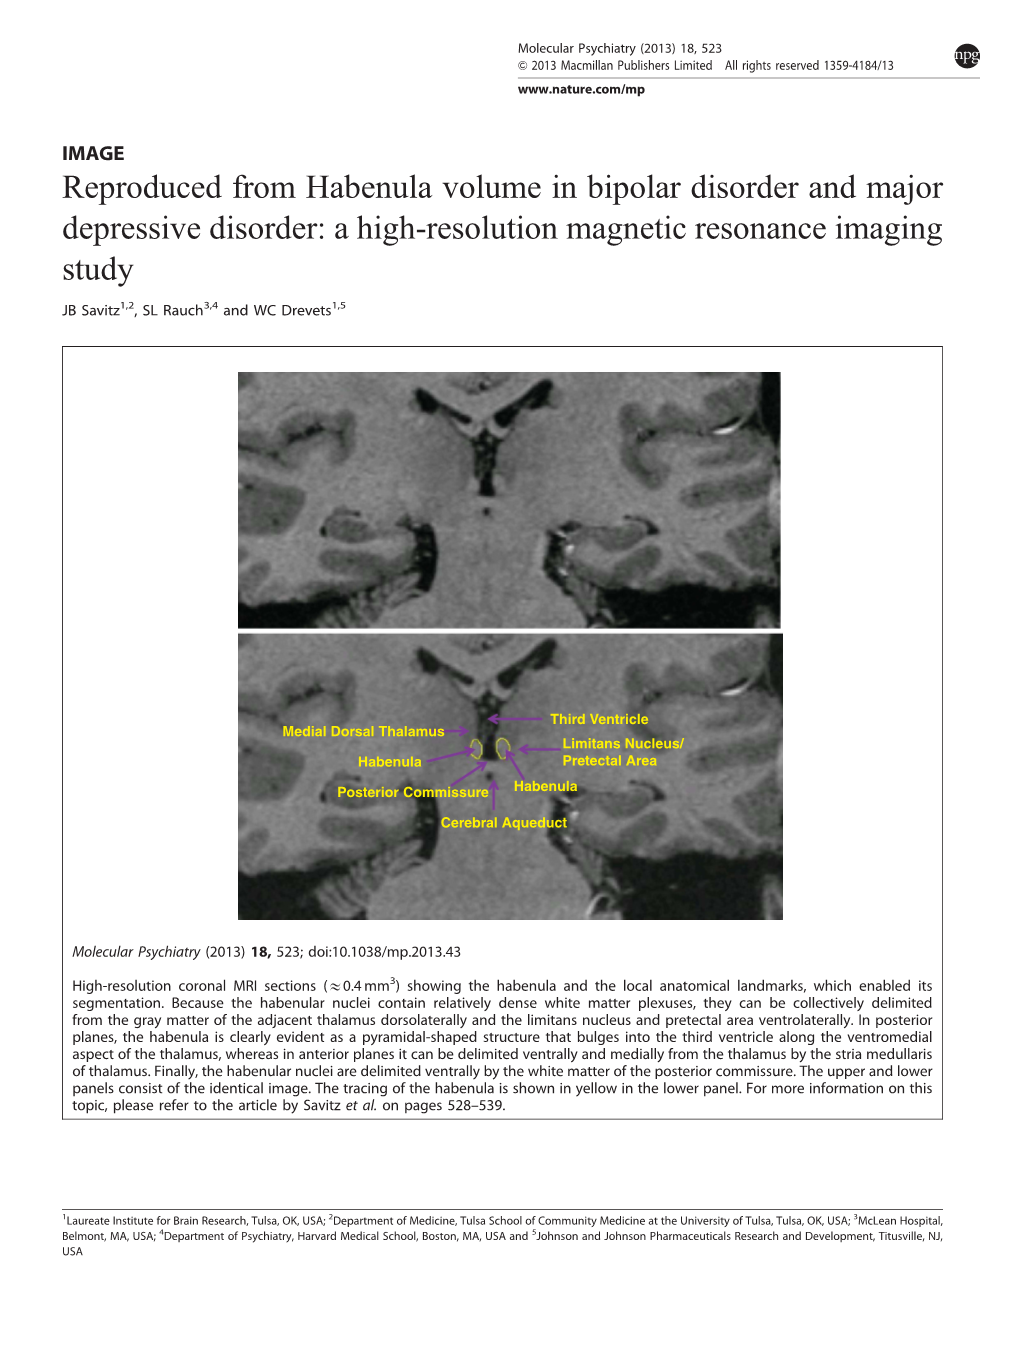 Reproduced from Habenula Volume in Bipolar Disorder and Major Depressive Disorder: a High-Resolution Magnetic Resonance Imaging Study